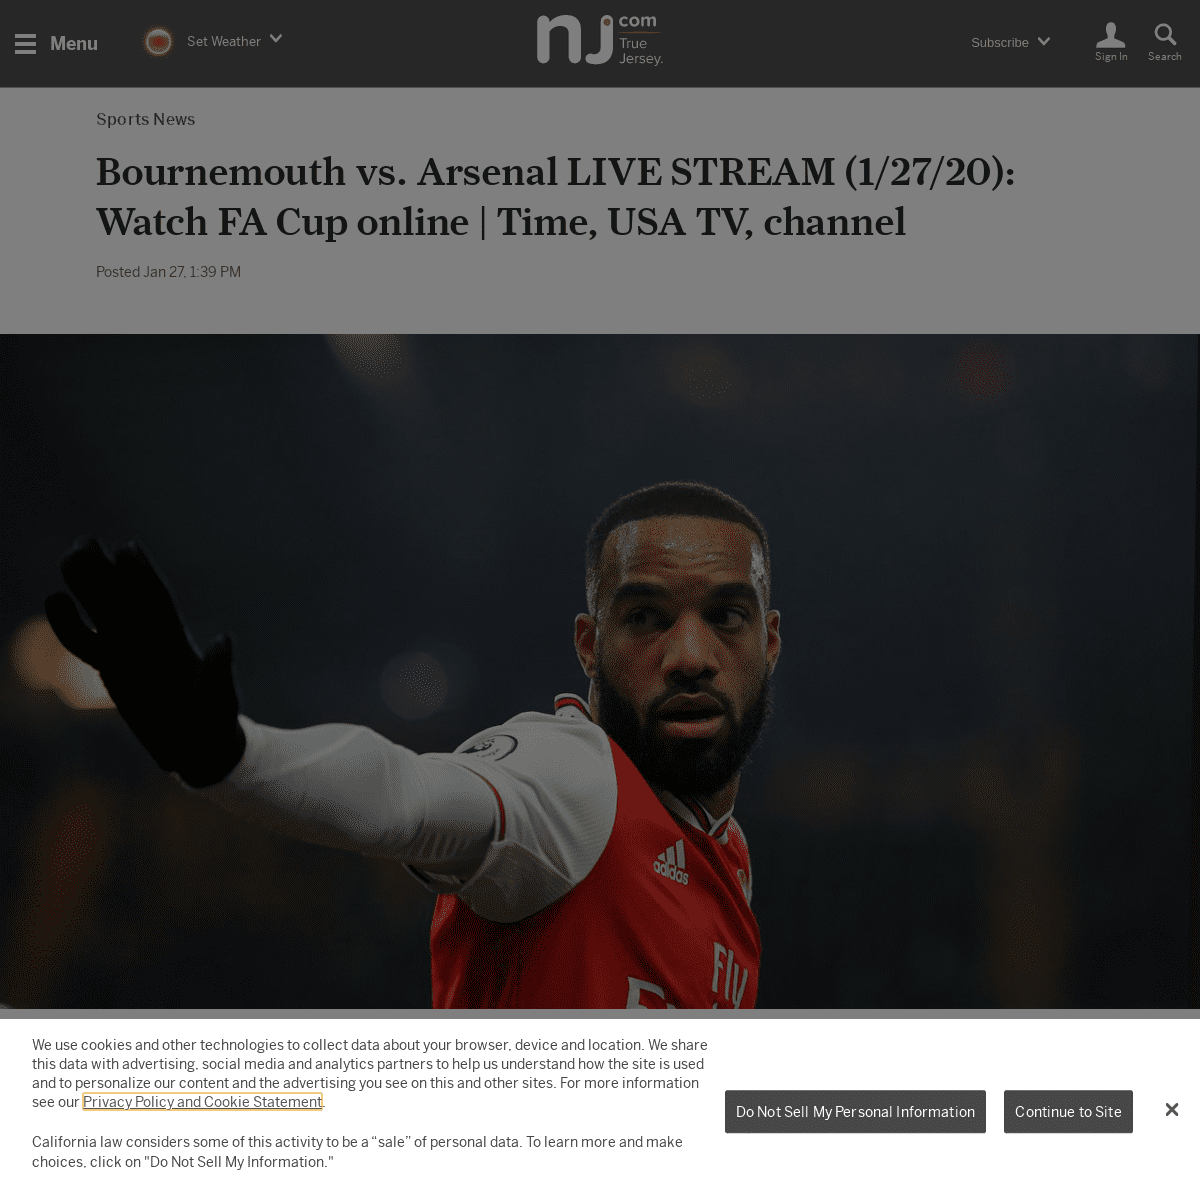 A complete backup of www.nj.com/sports-news/2020/01/bournemouth-vs-arsenal-live-stream-12720-watch-fa-cup-online-time-usa-tv-cha